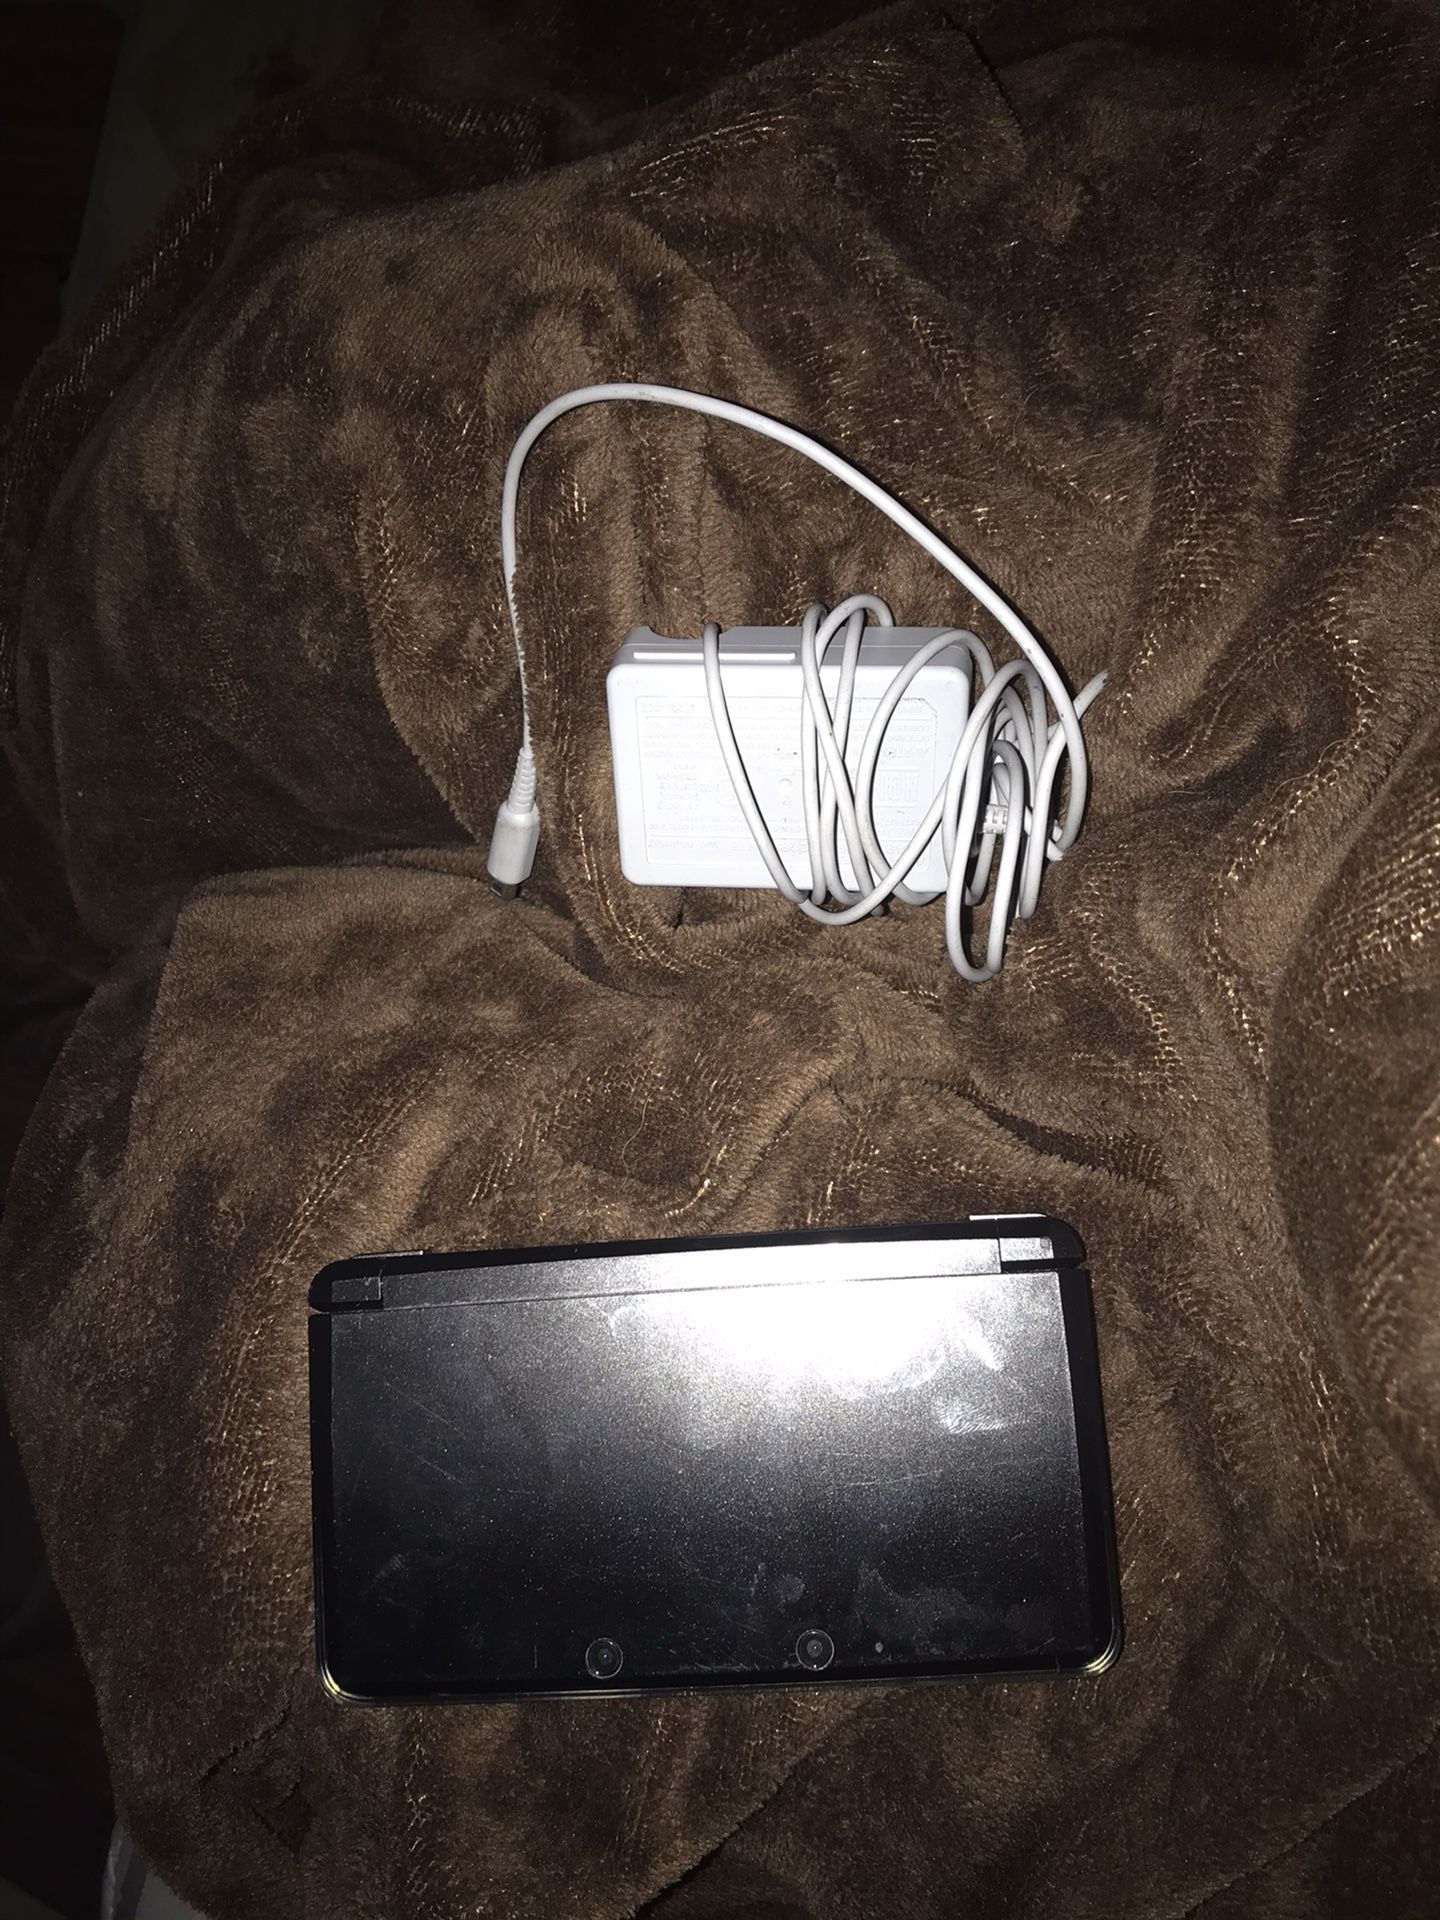 Nintendo 3ds with charger